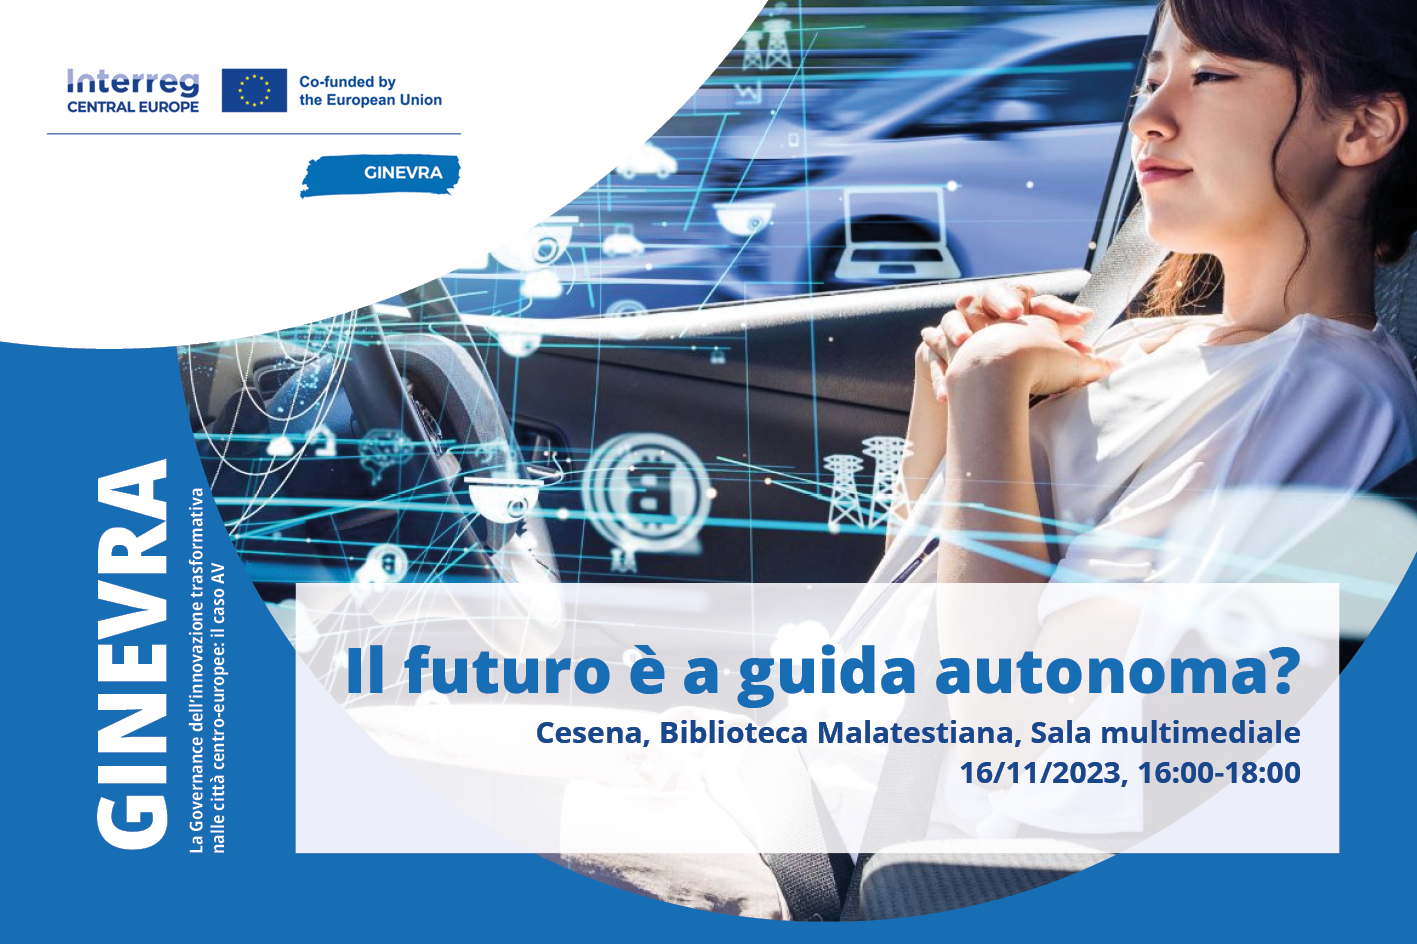 GINEVRA Project Launch Event: Paving the Way for Responsible Technological Innovation